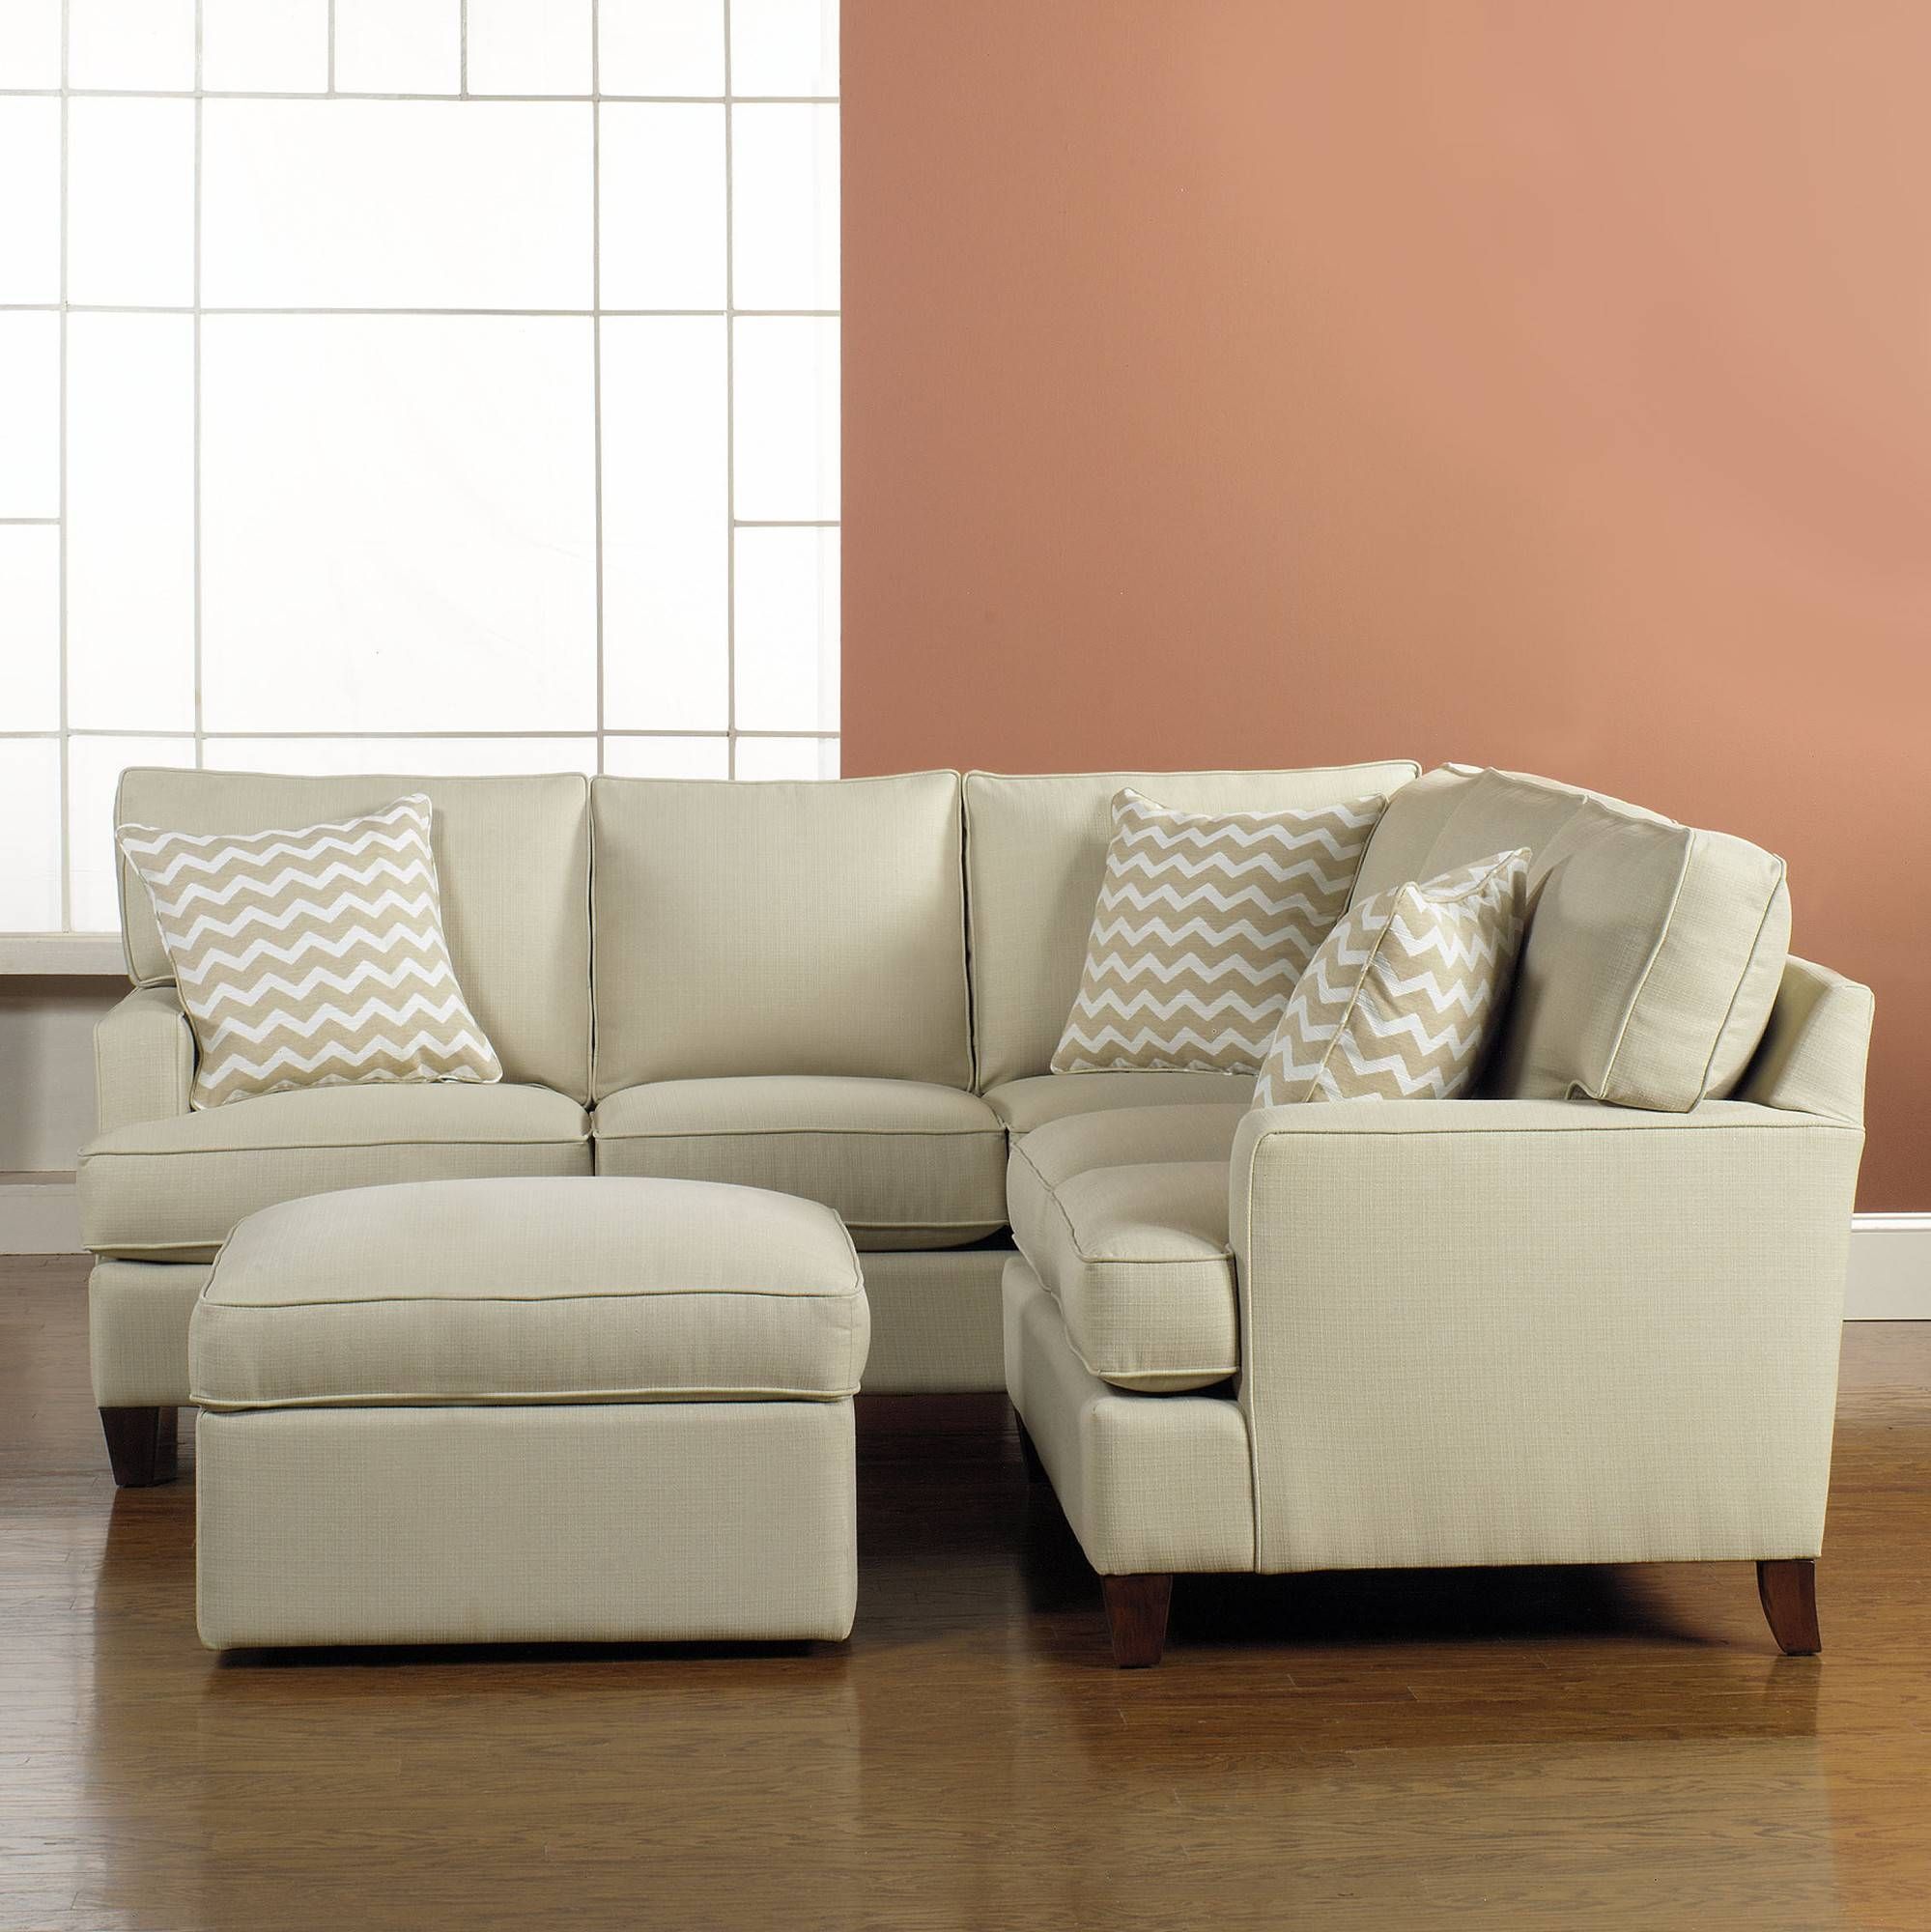 Small Space Sofas Top 10 Contemporary Sofas For Small Spaces Pertaining To Sectional Sofas In Small Spaces (View 6 of 25)